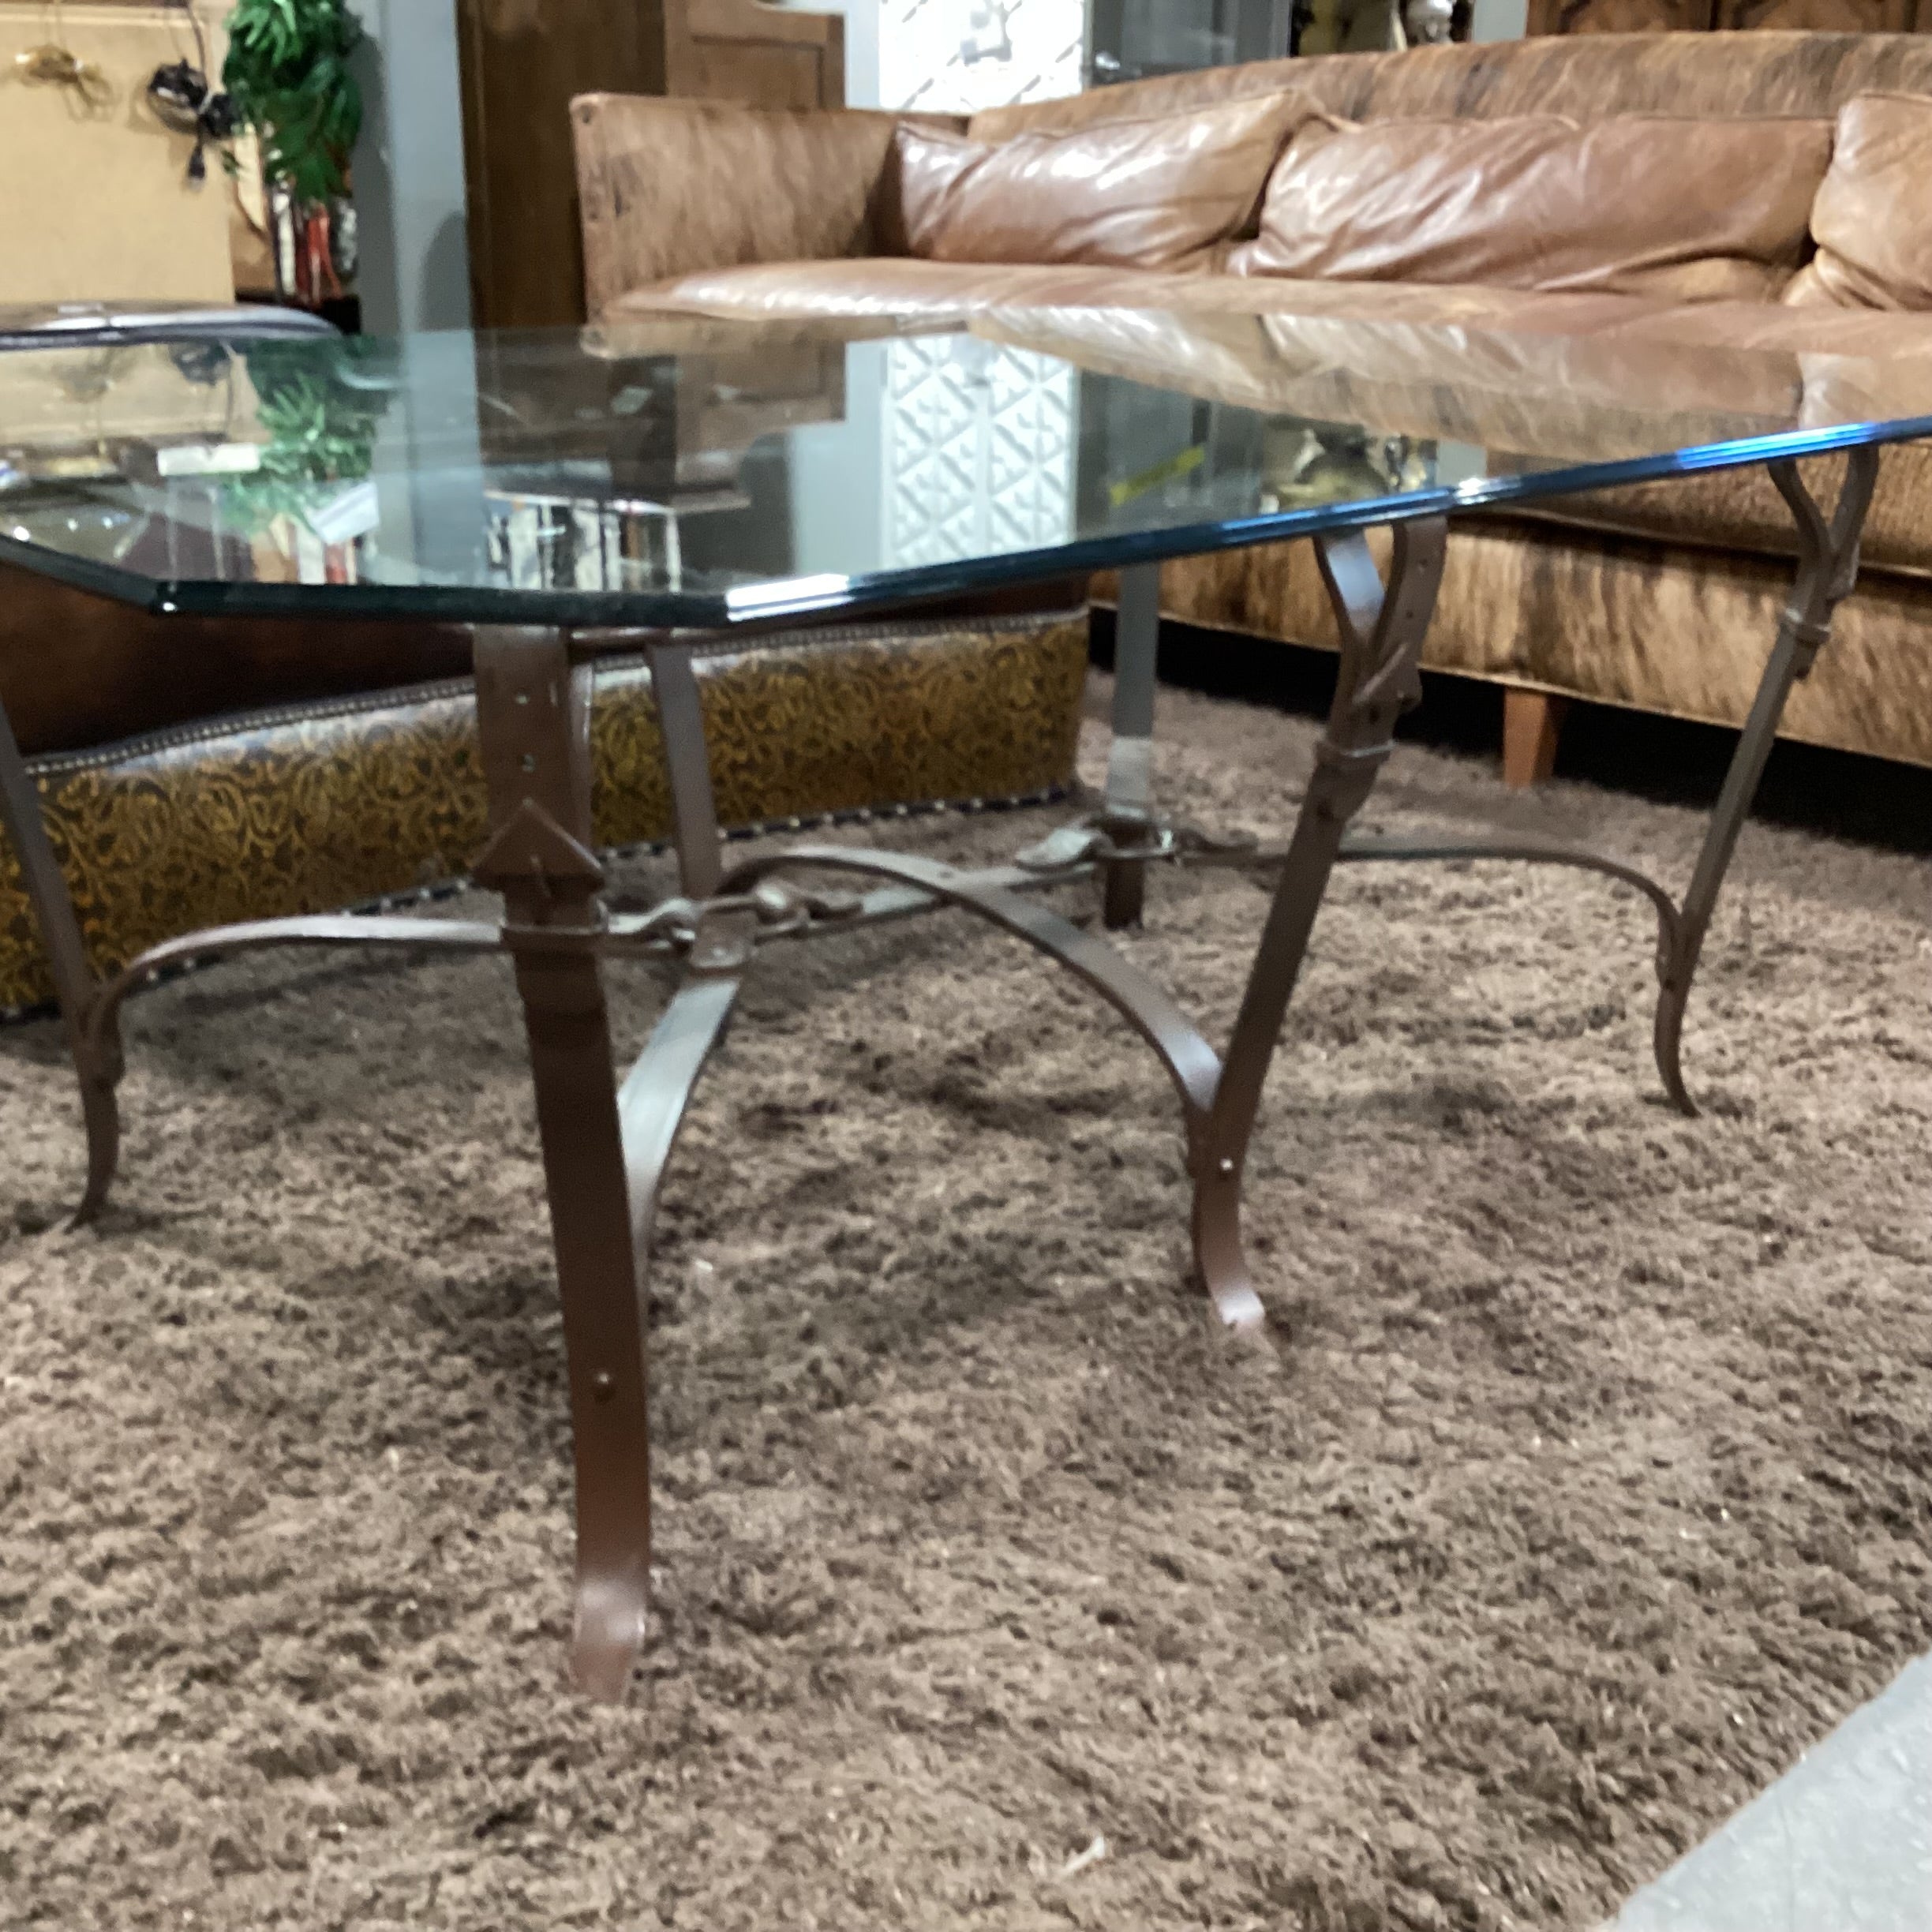 Metal Leather Belt Look & Glass Coffee Table 58"x 42"x 23"